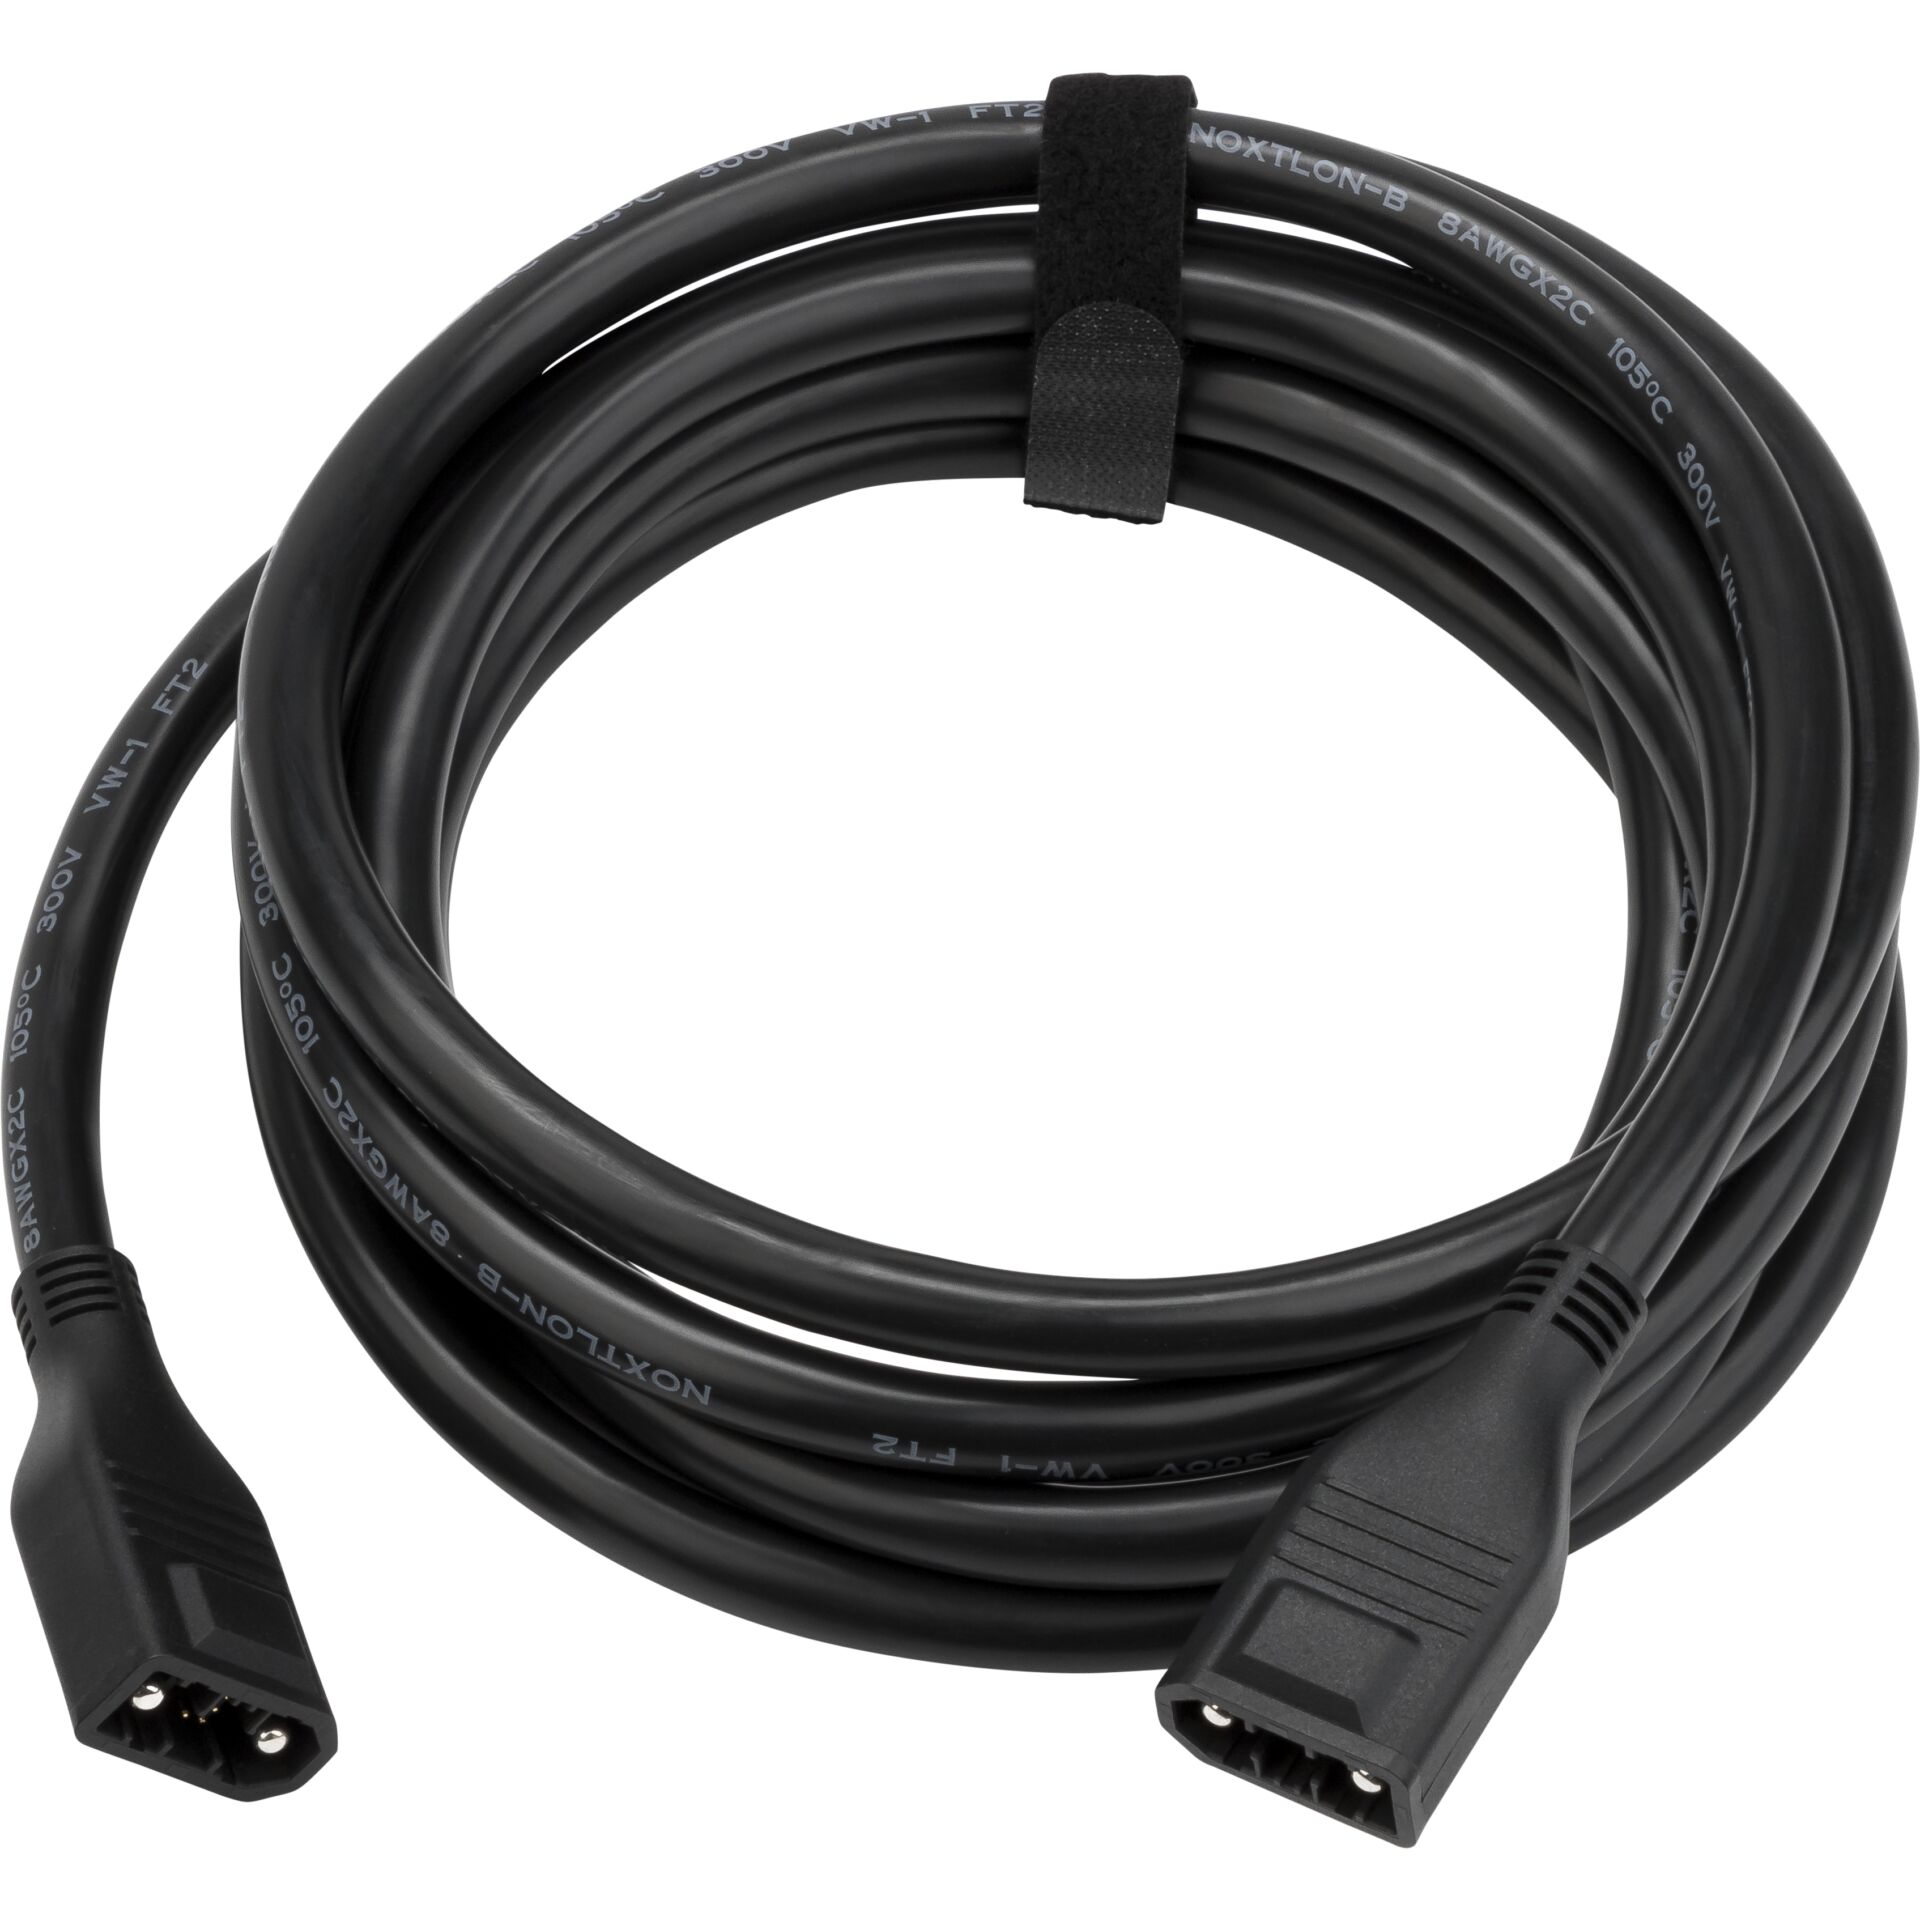 EcoFlow MH200-WAVE-XT150 Extended Connection Cable 825533_00